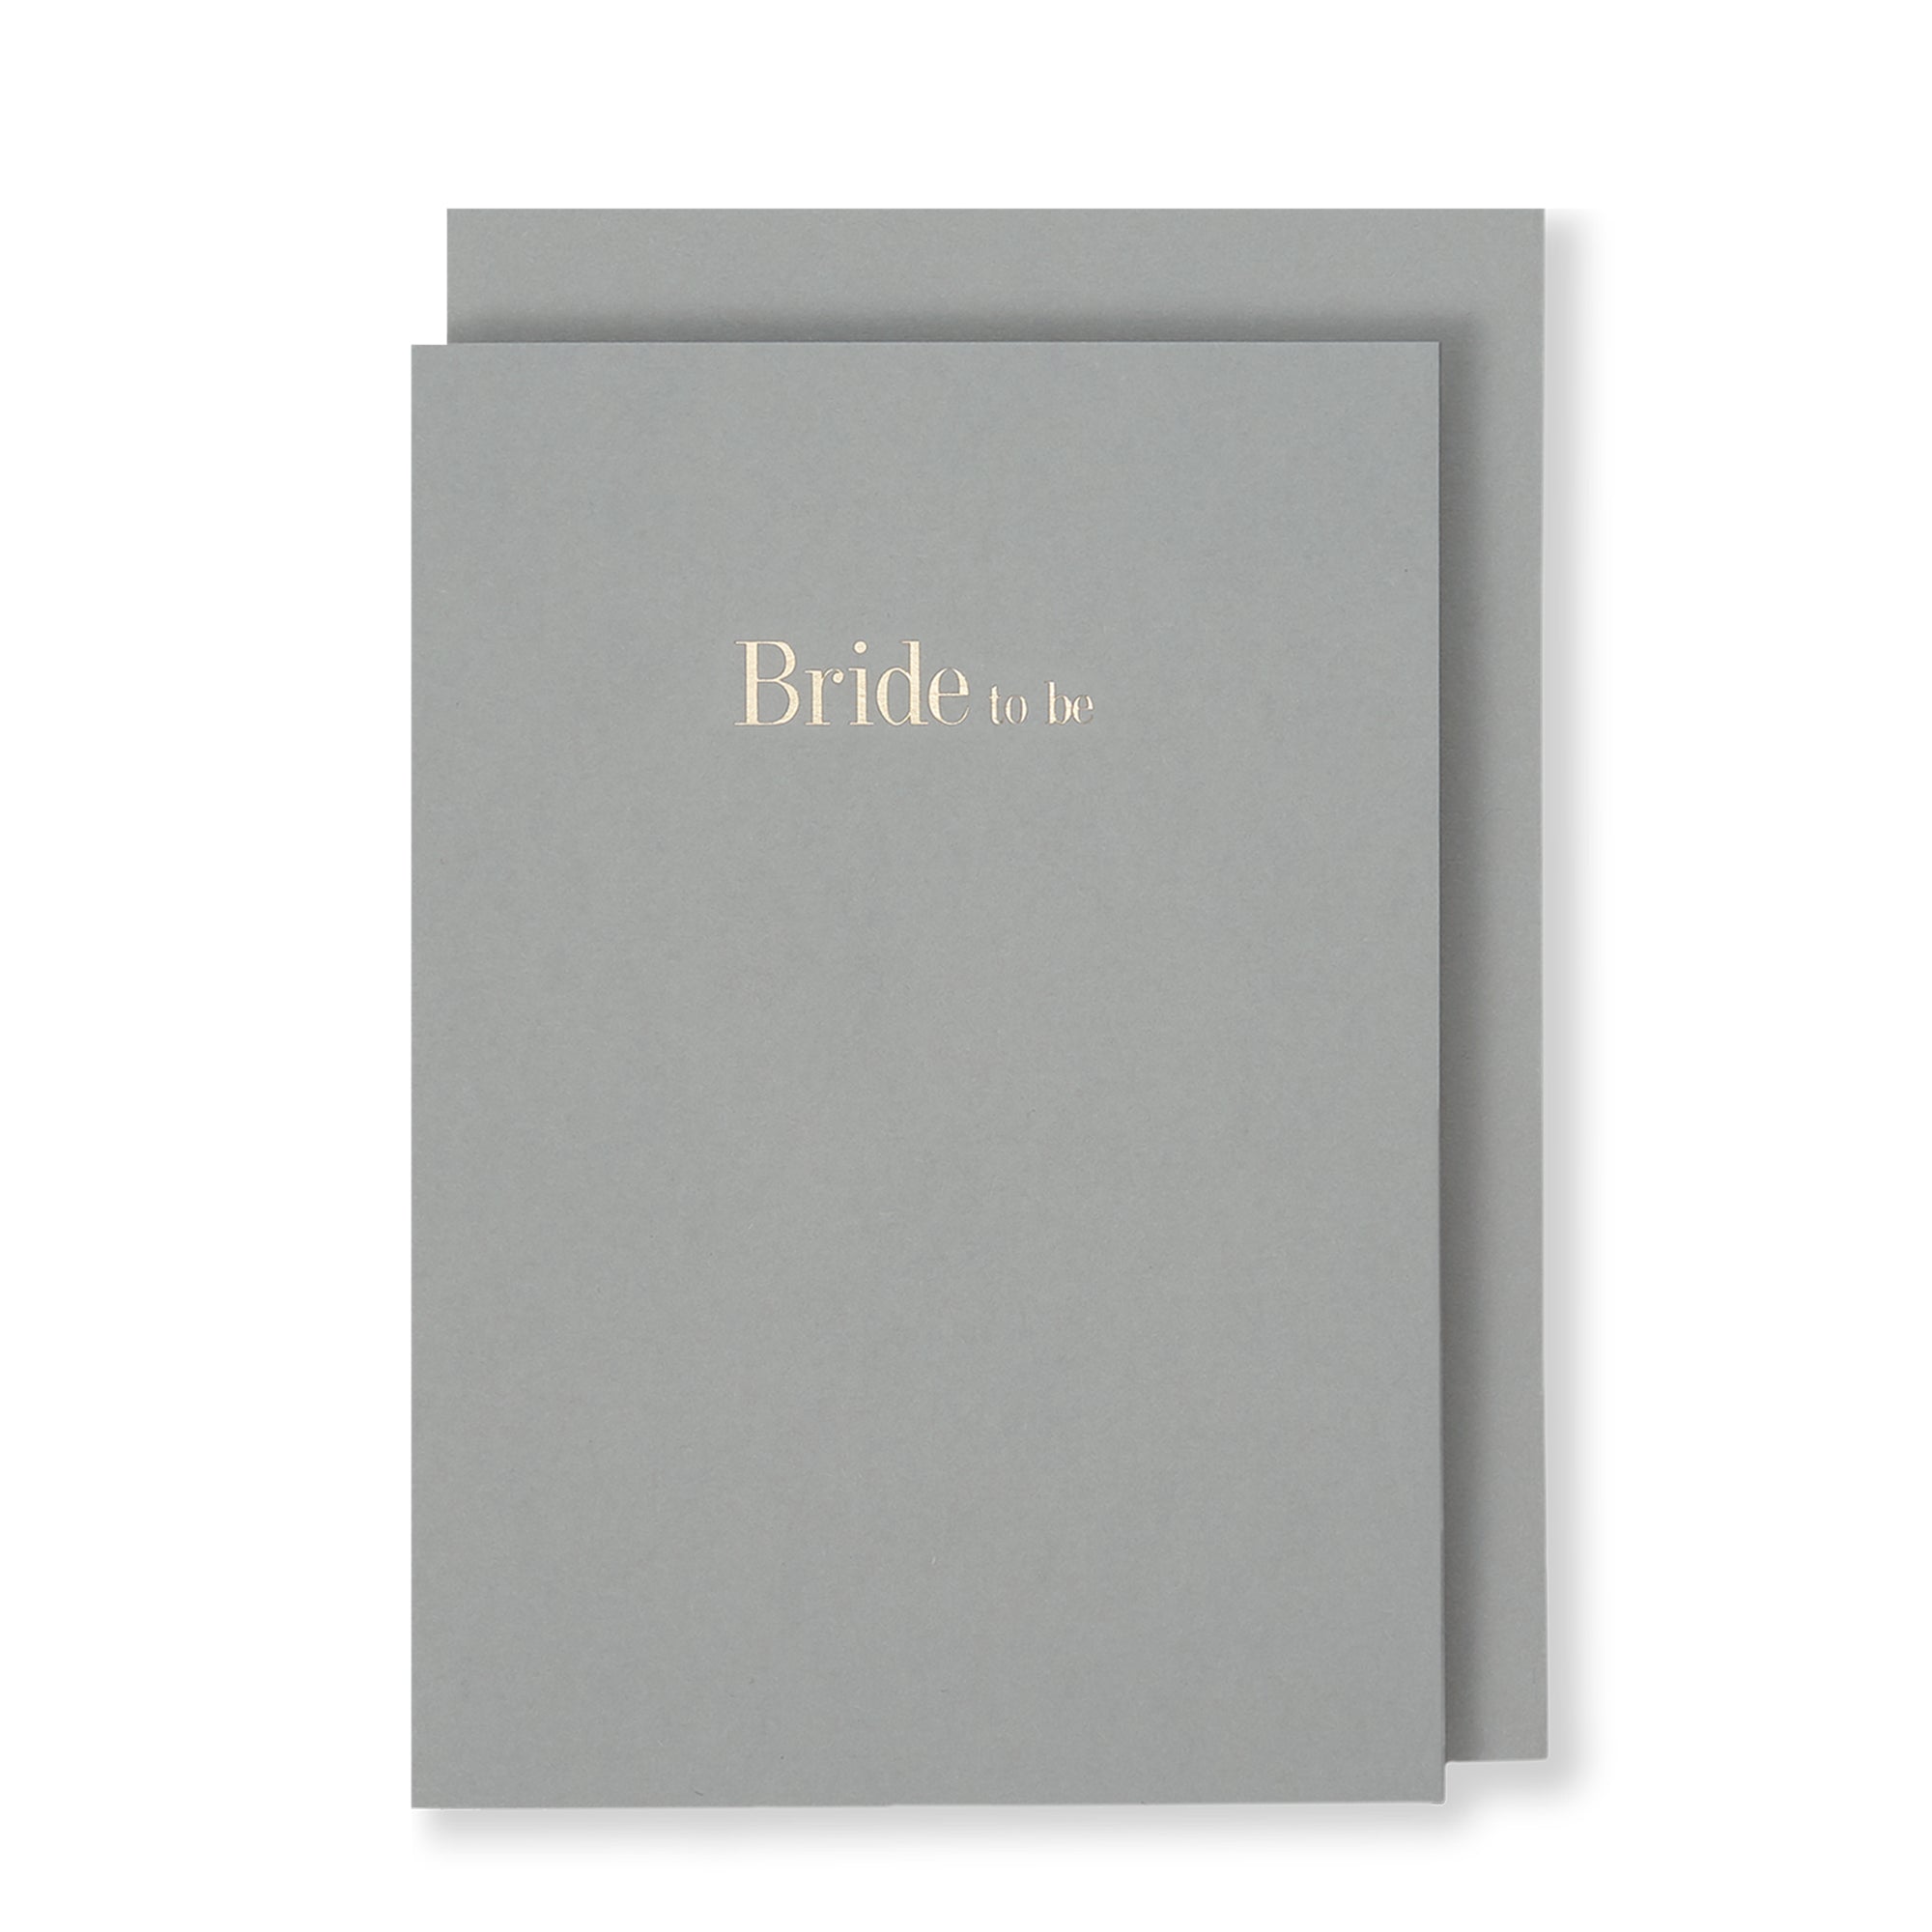 Bride To Be Greeting Card in Grey, Front